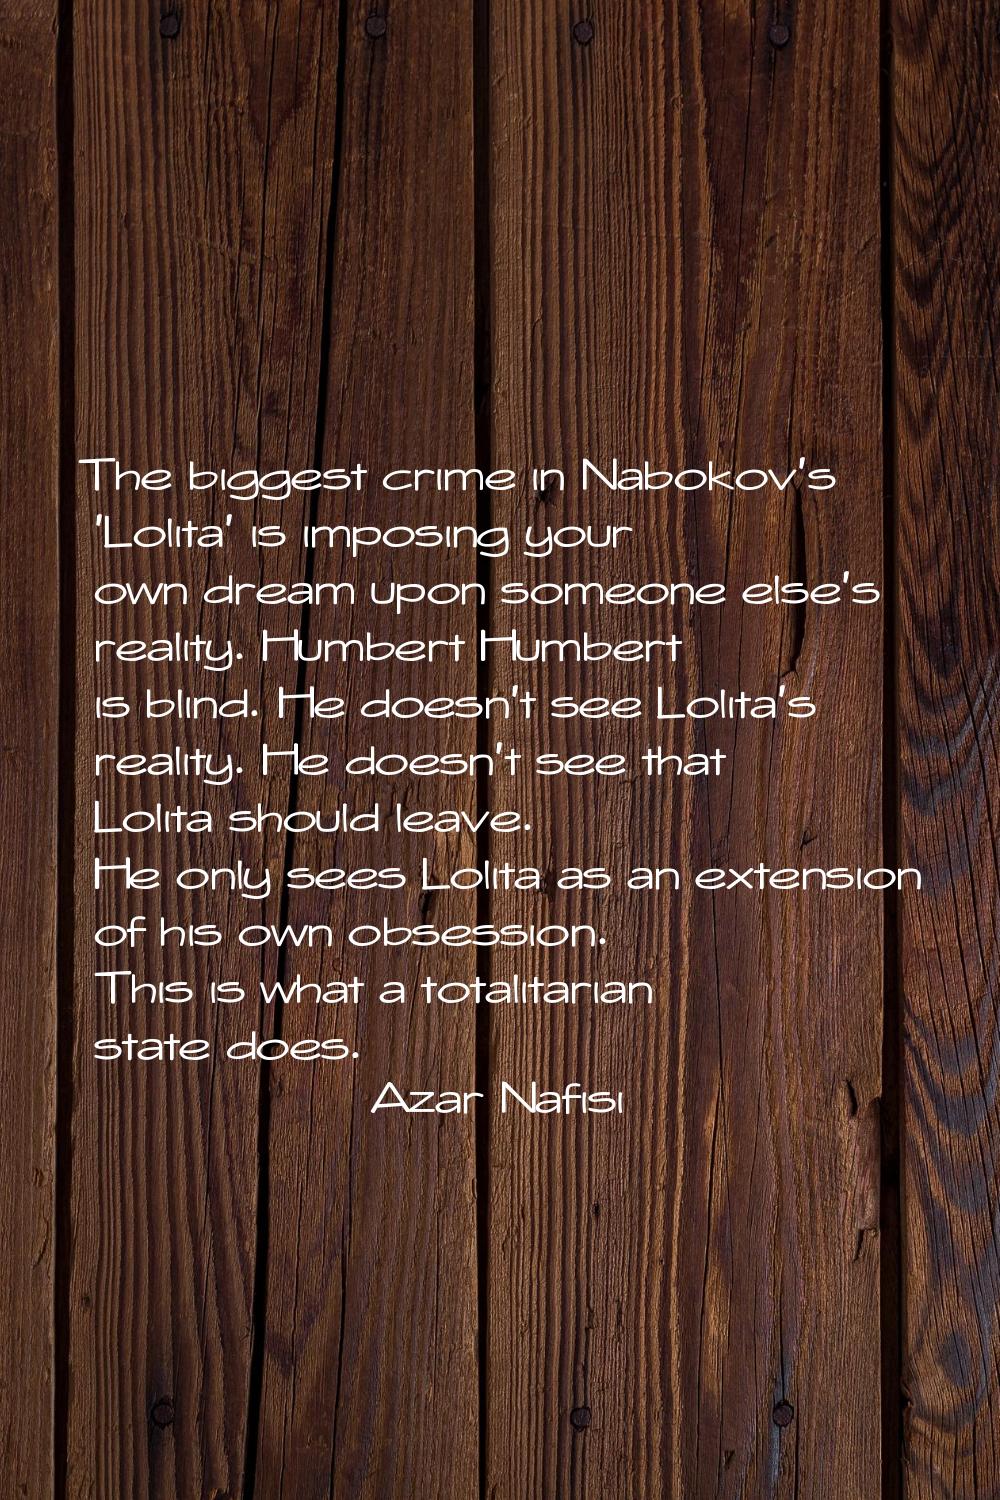 The biggest crime in Nabokov's 'Lolita' is imposing your own dream upon someone else's reality. Hum